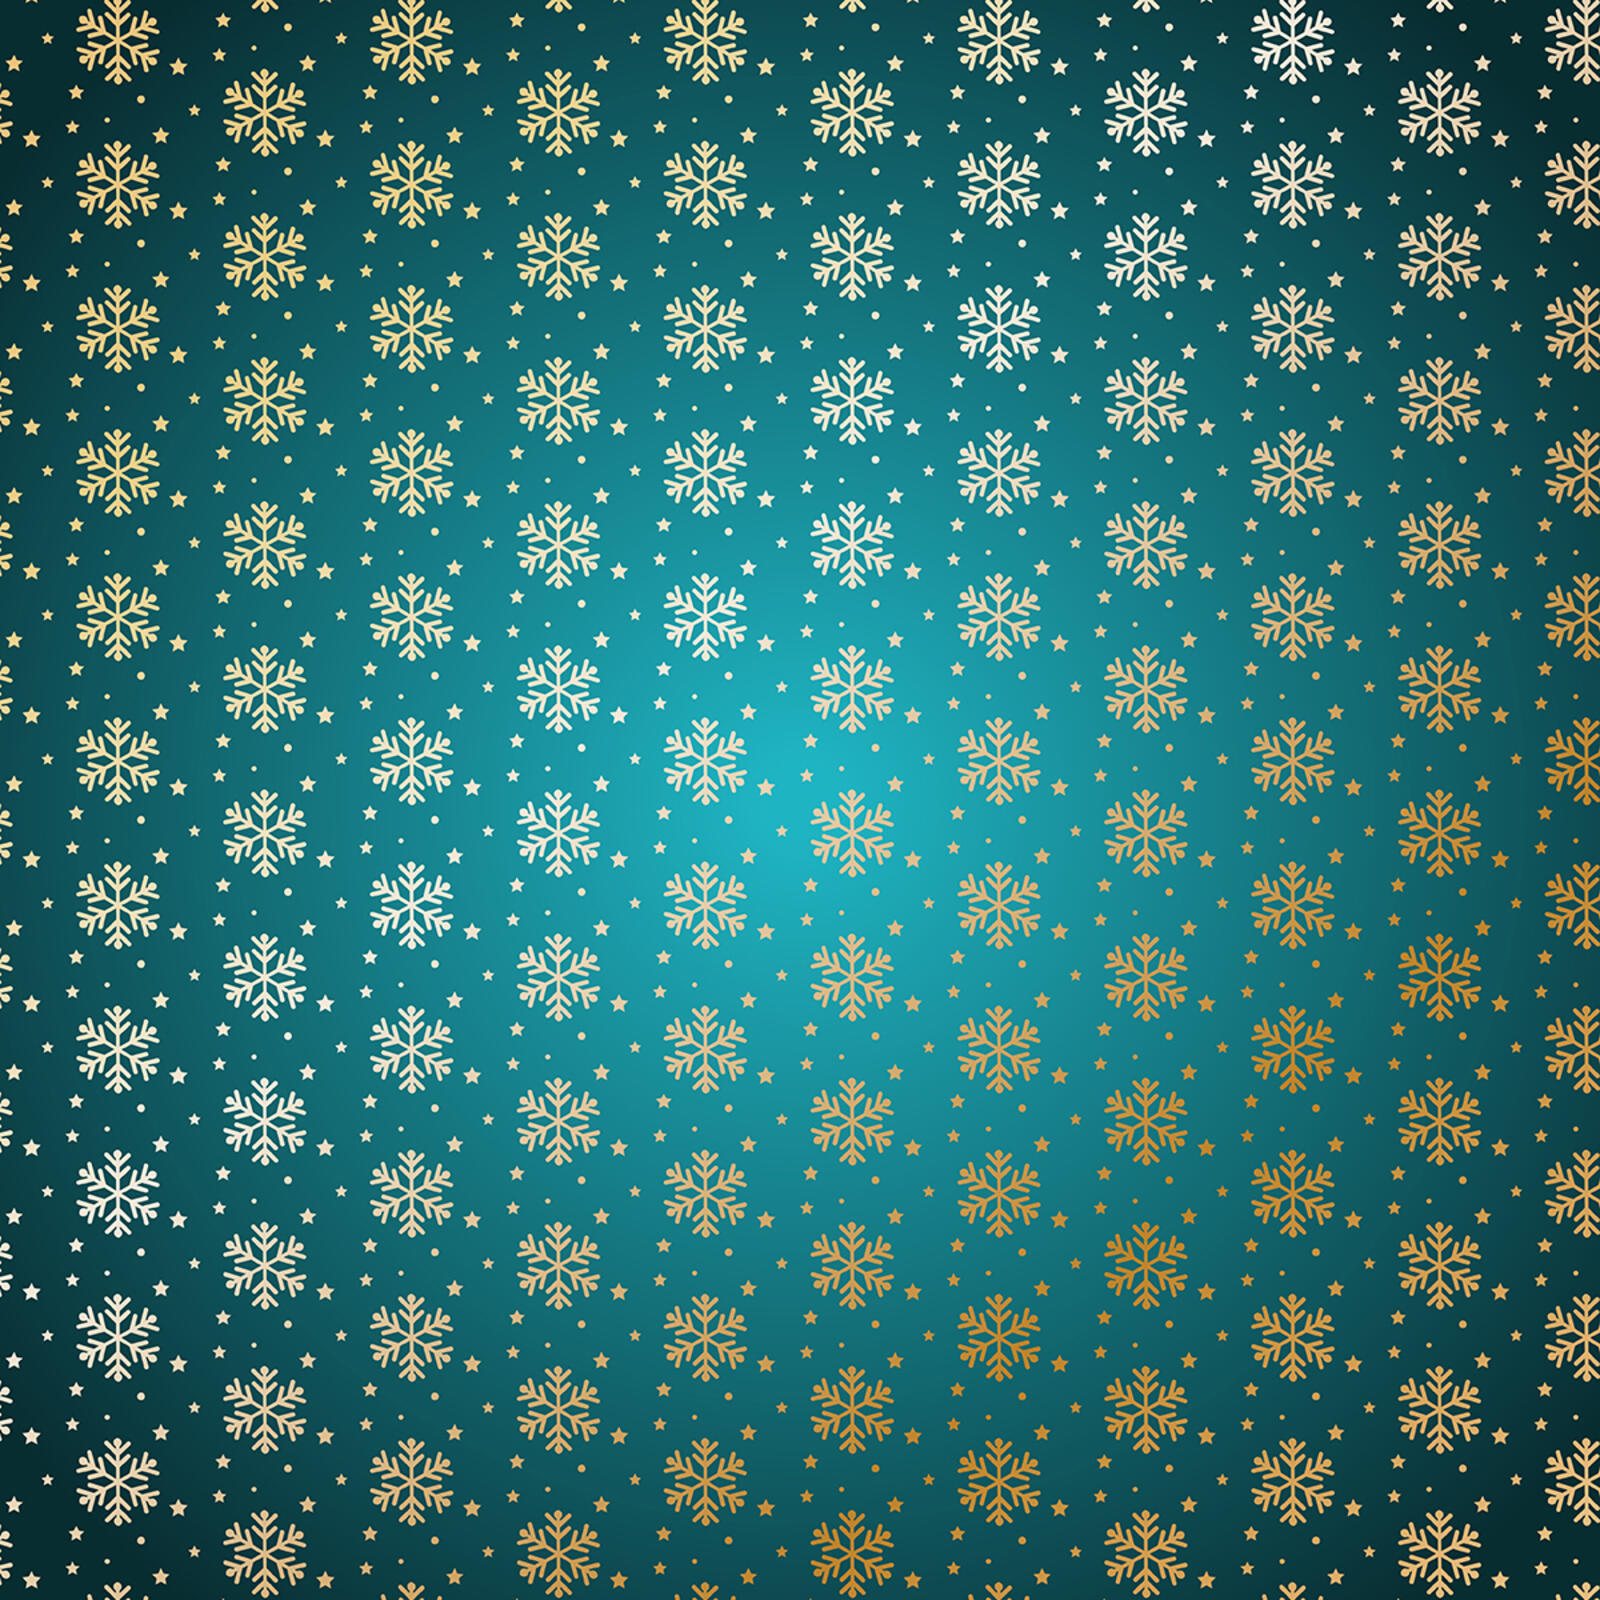 Wallpapers texture background snowflakes on the desktop